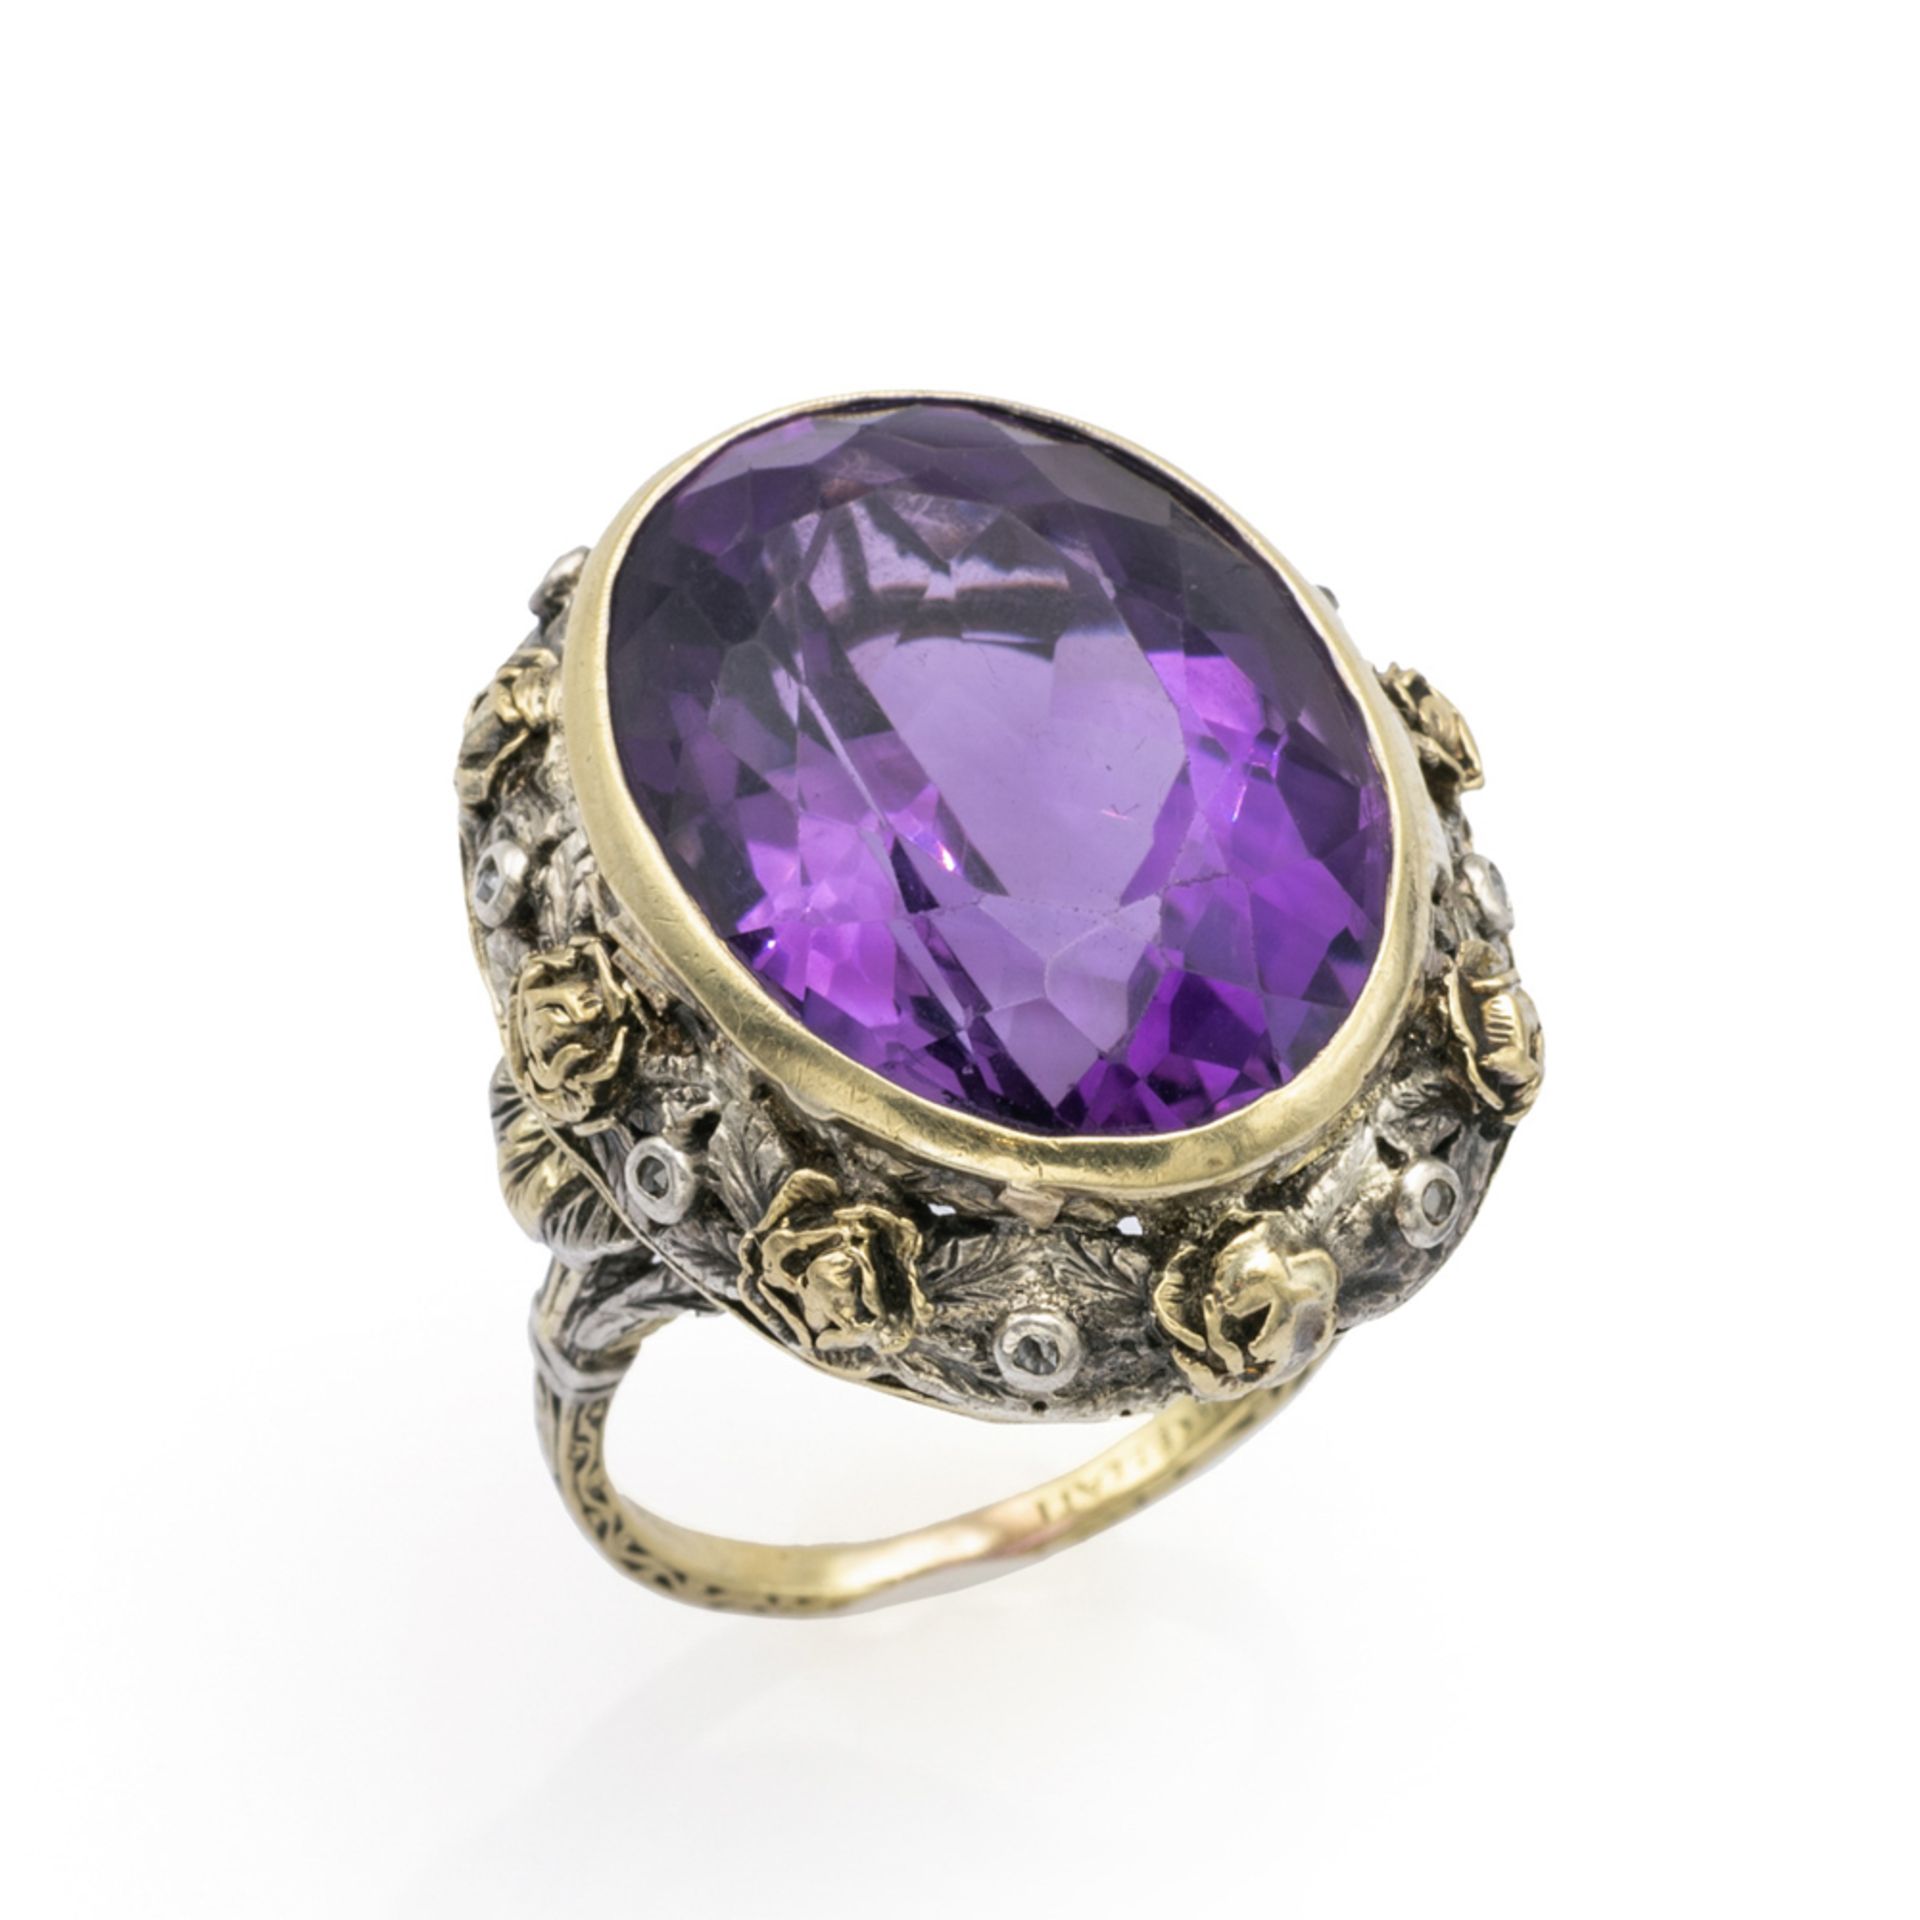 Mario Buccellati, 18kt yellow gold and silver ring with amethyst